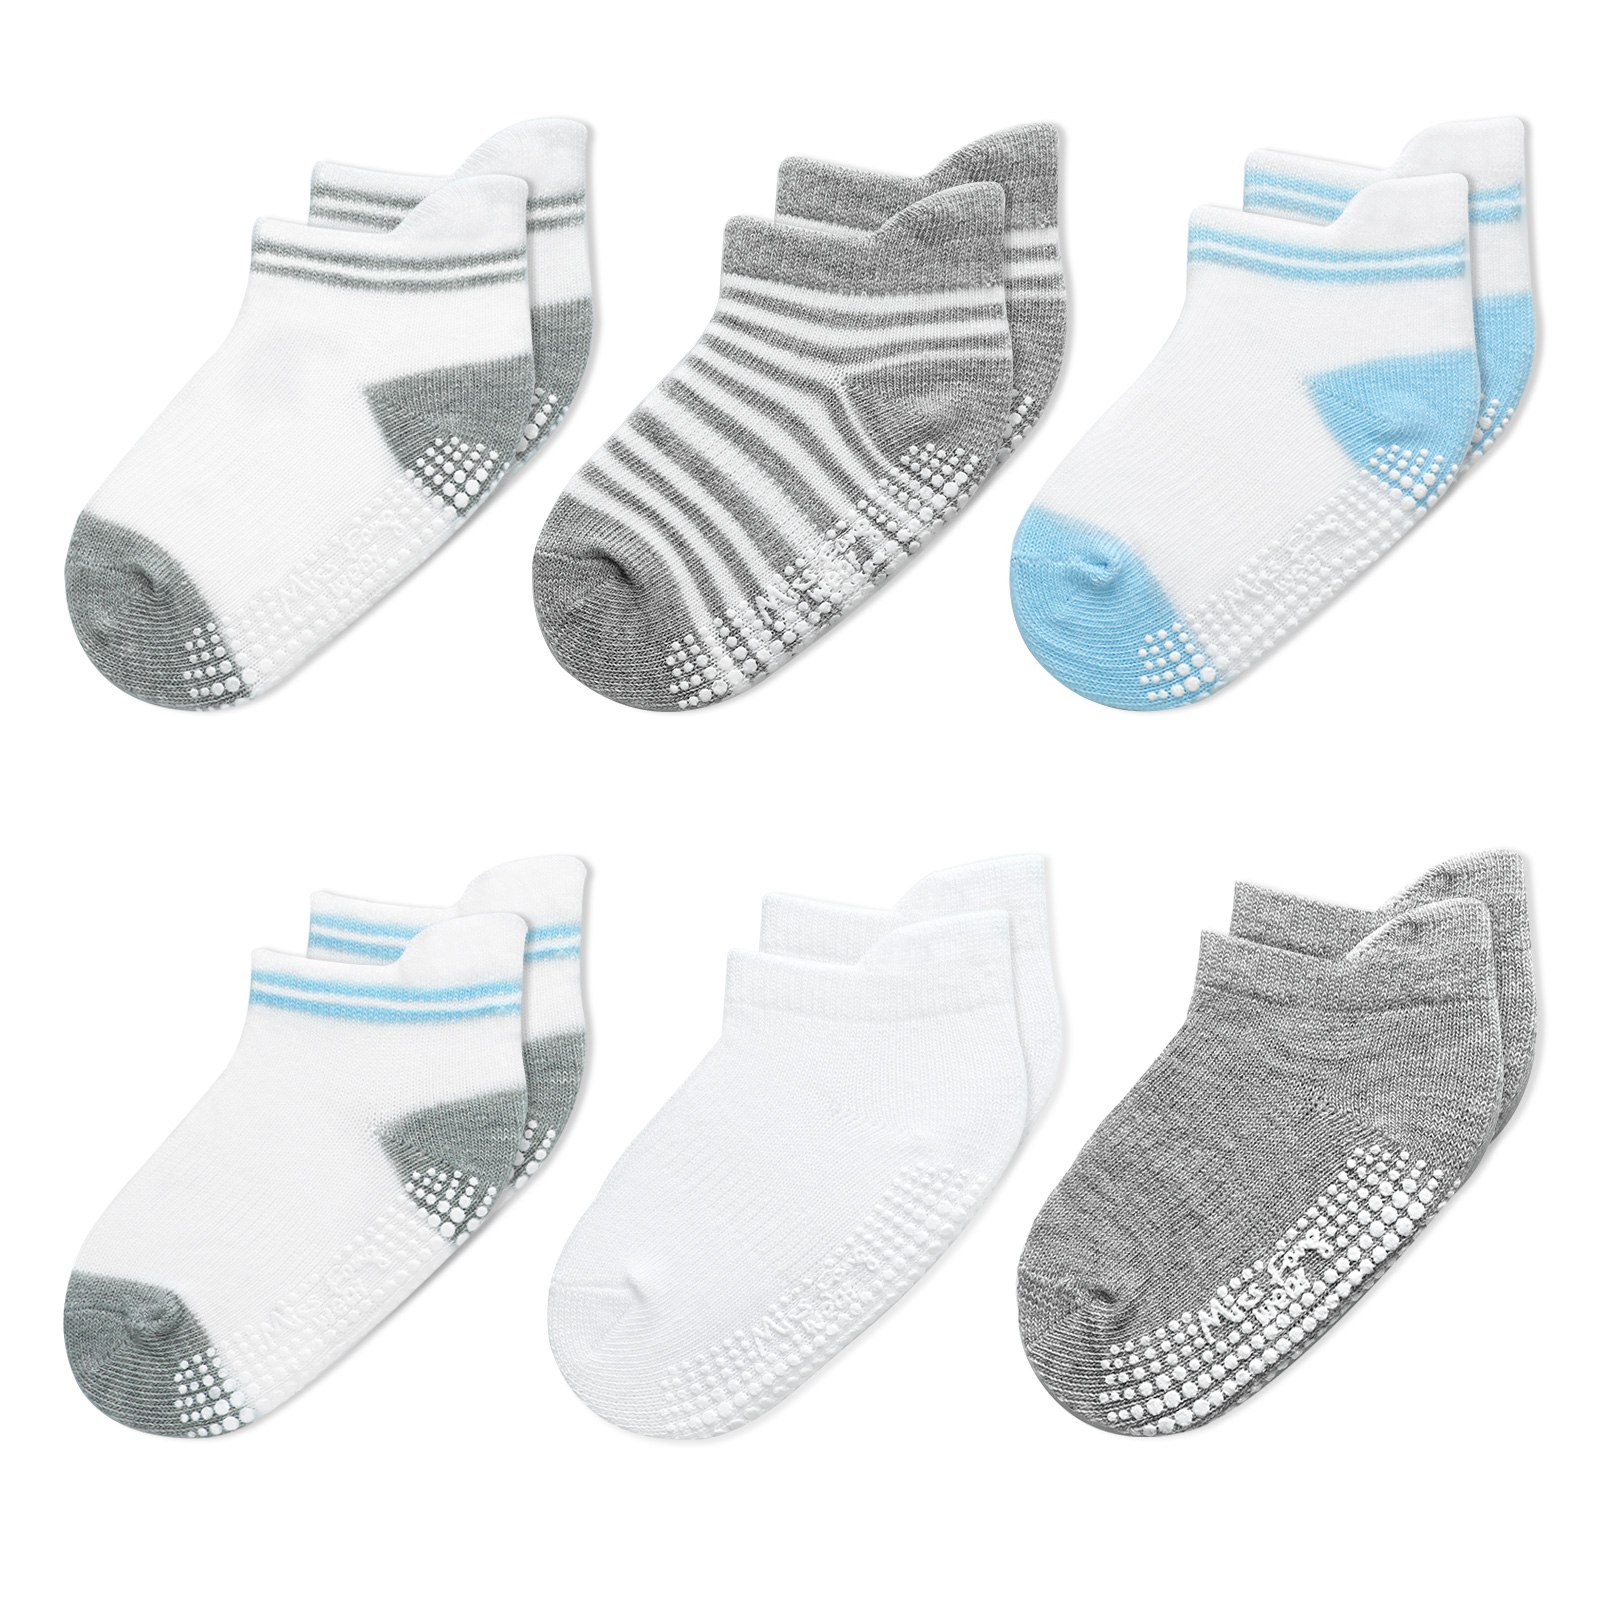 Baby Socks 6 Pairs Infant Socks With Non Slip Grips by Miss Fong Wear Baby  Boy Socks Ankle Socks For 0-6, 6-12,12-36 Months